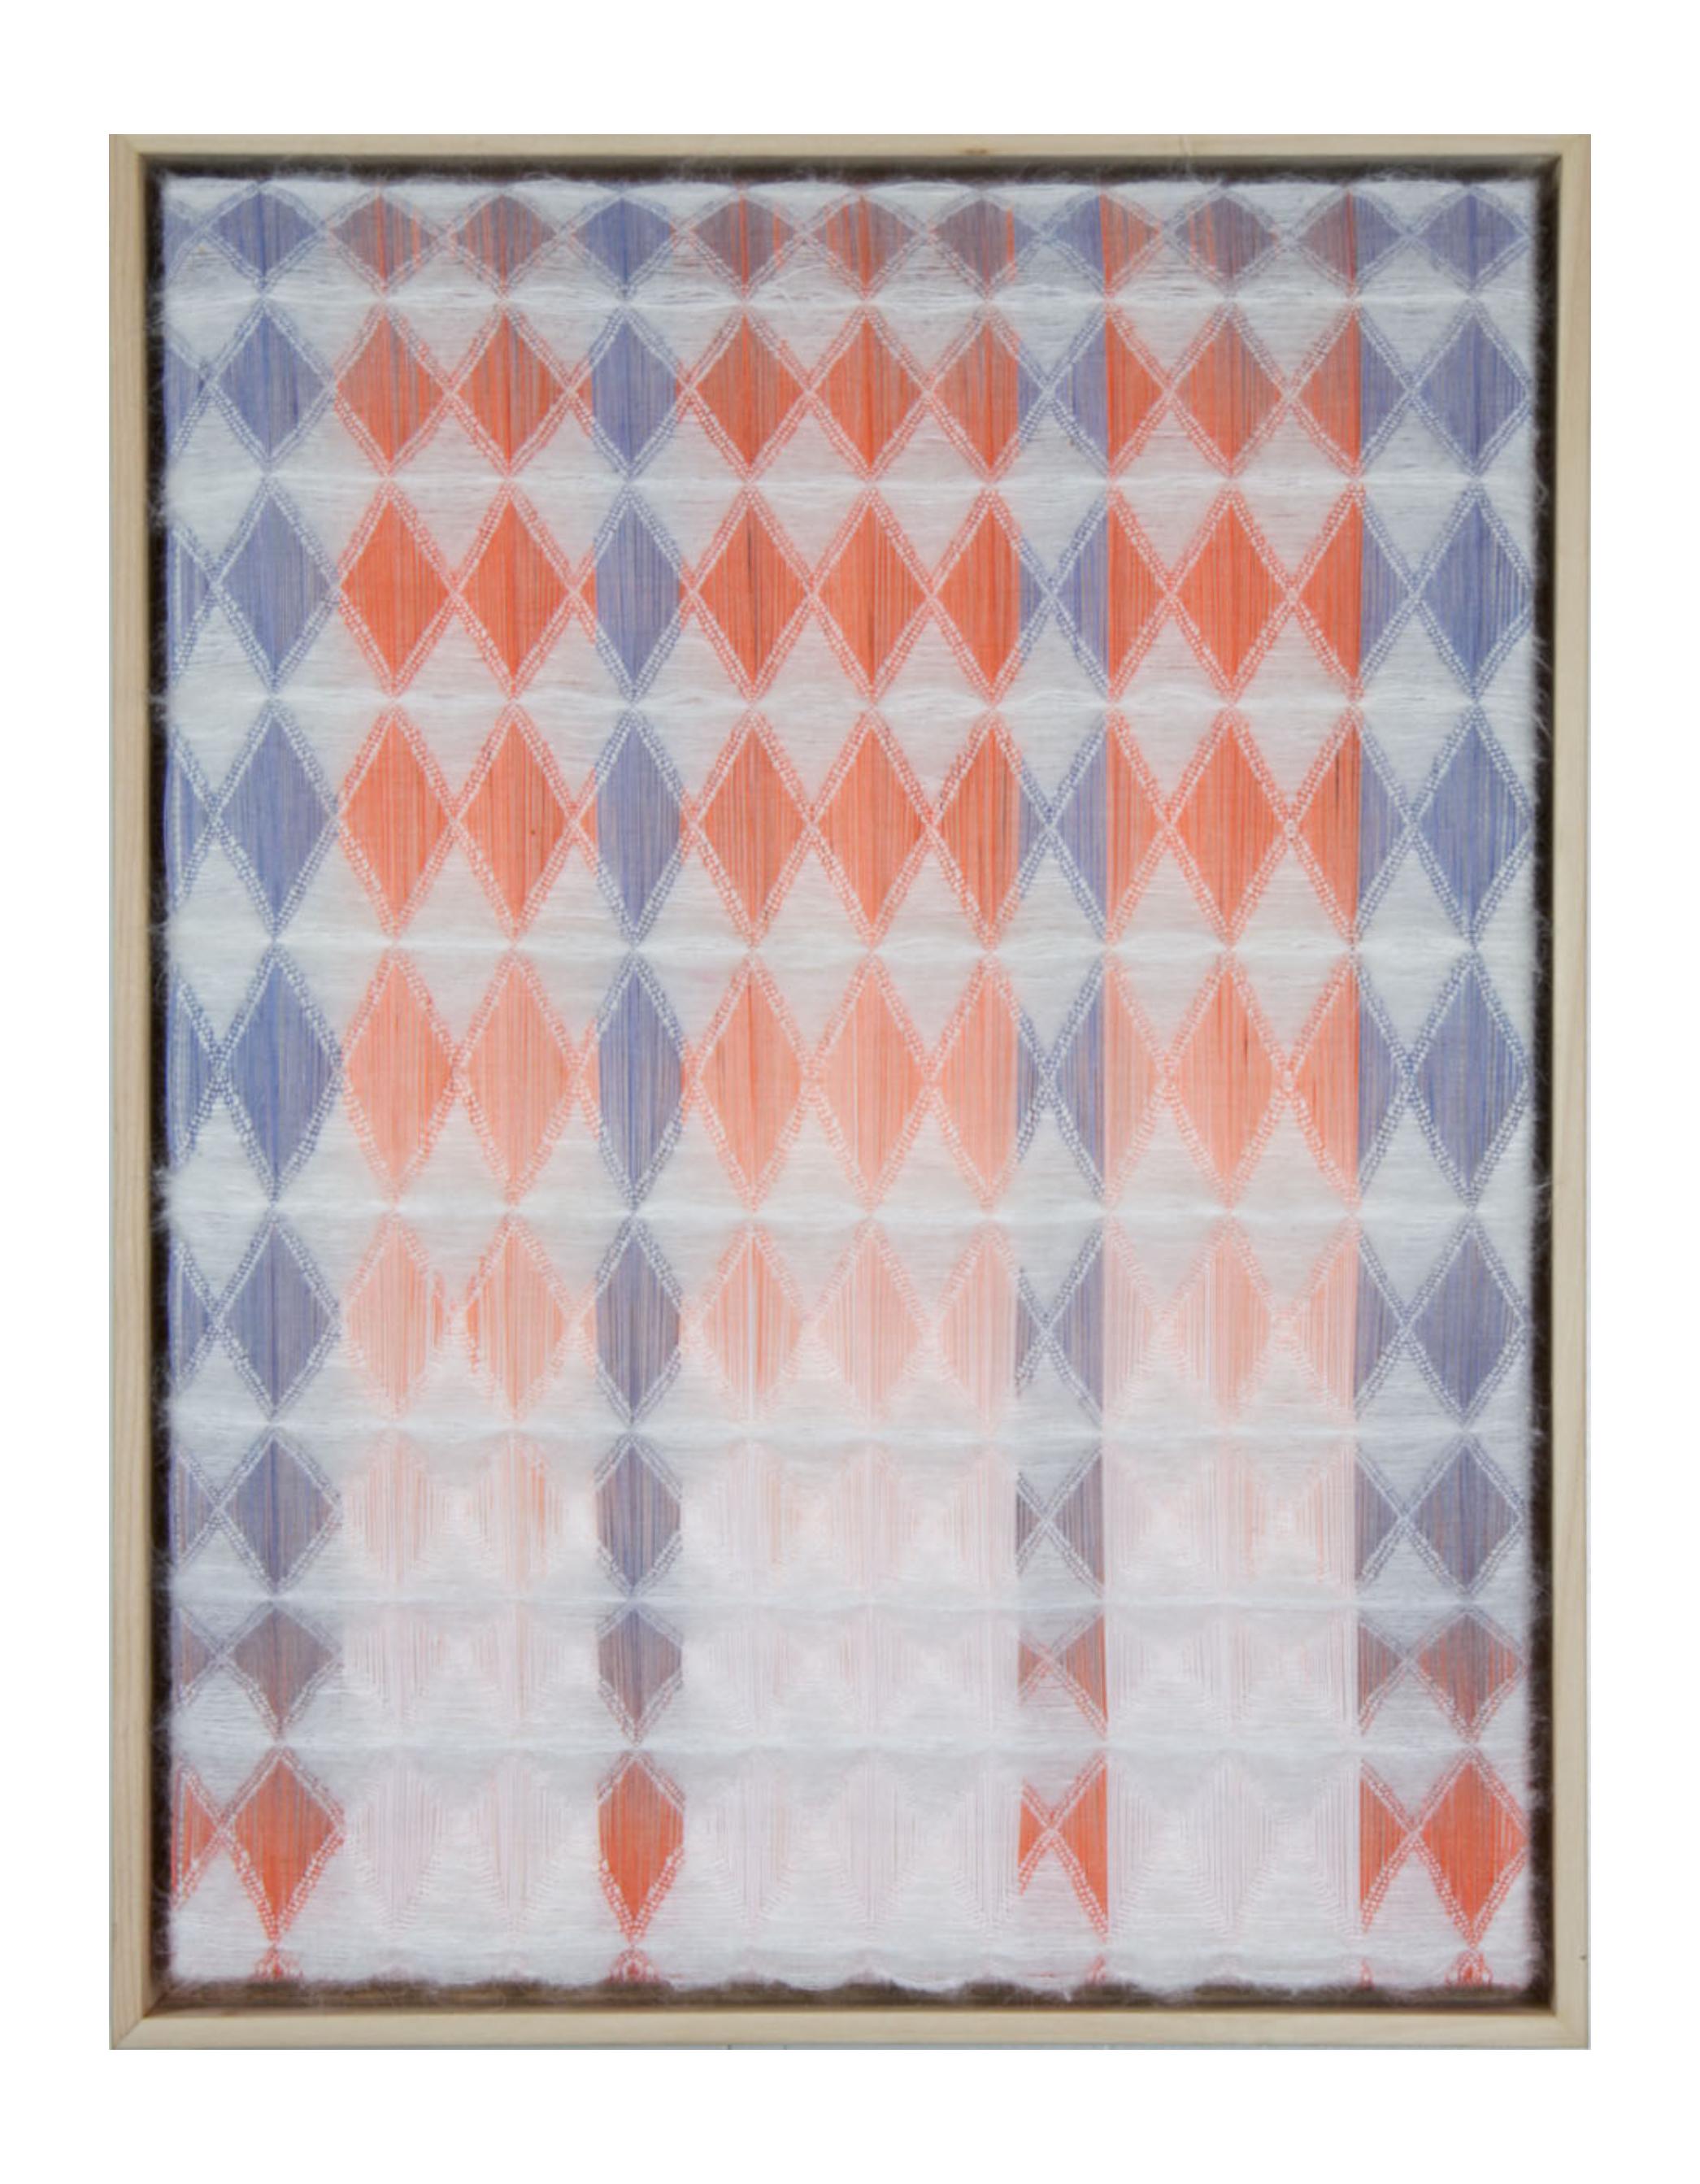 *On view at Ivester Contemporary through May 27th*  

Darling by Anya Molyviatis is a part of an ongoing series of three dimensional textiles that are handwoven on AVL Dobby Looms. The work uses dramatic color gradients as well as physical depth and